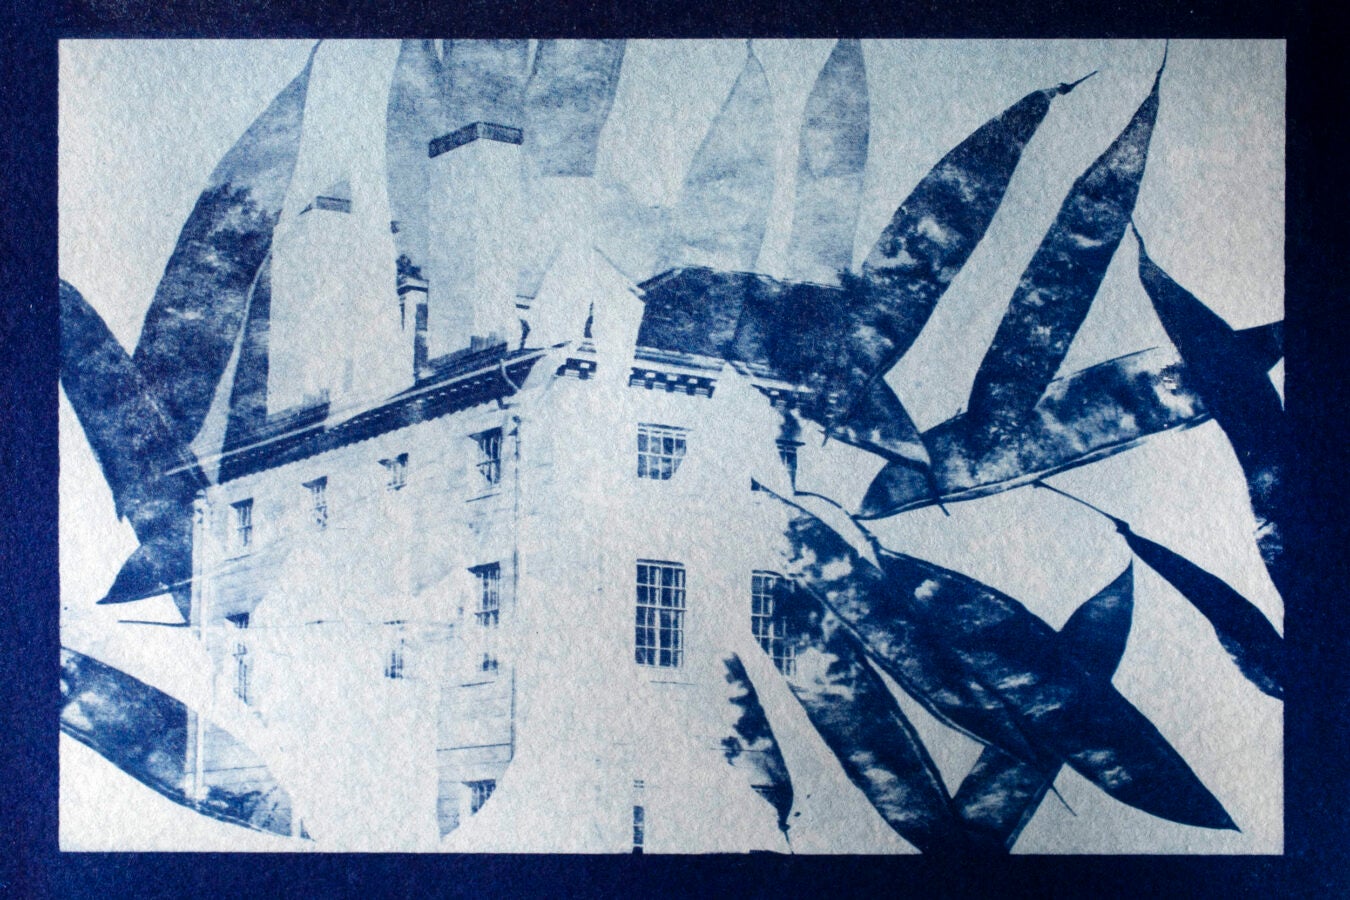 A cyanotype composites tree seed pods